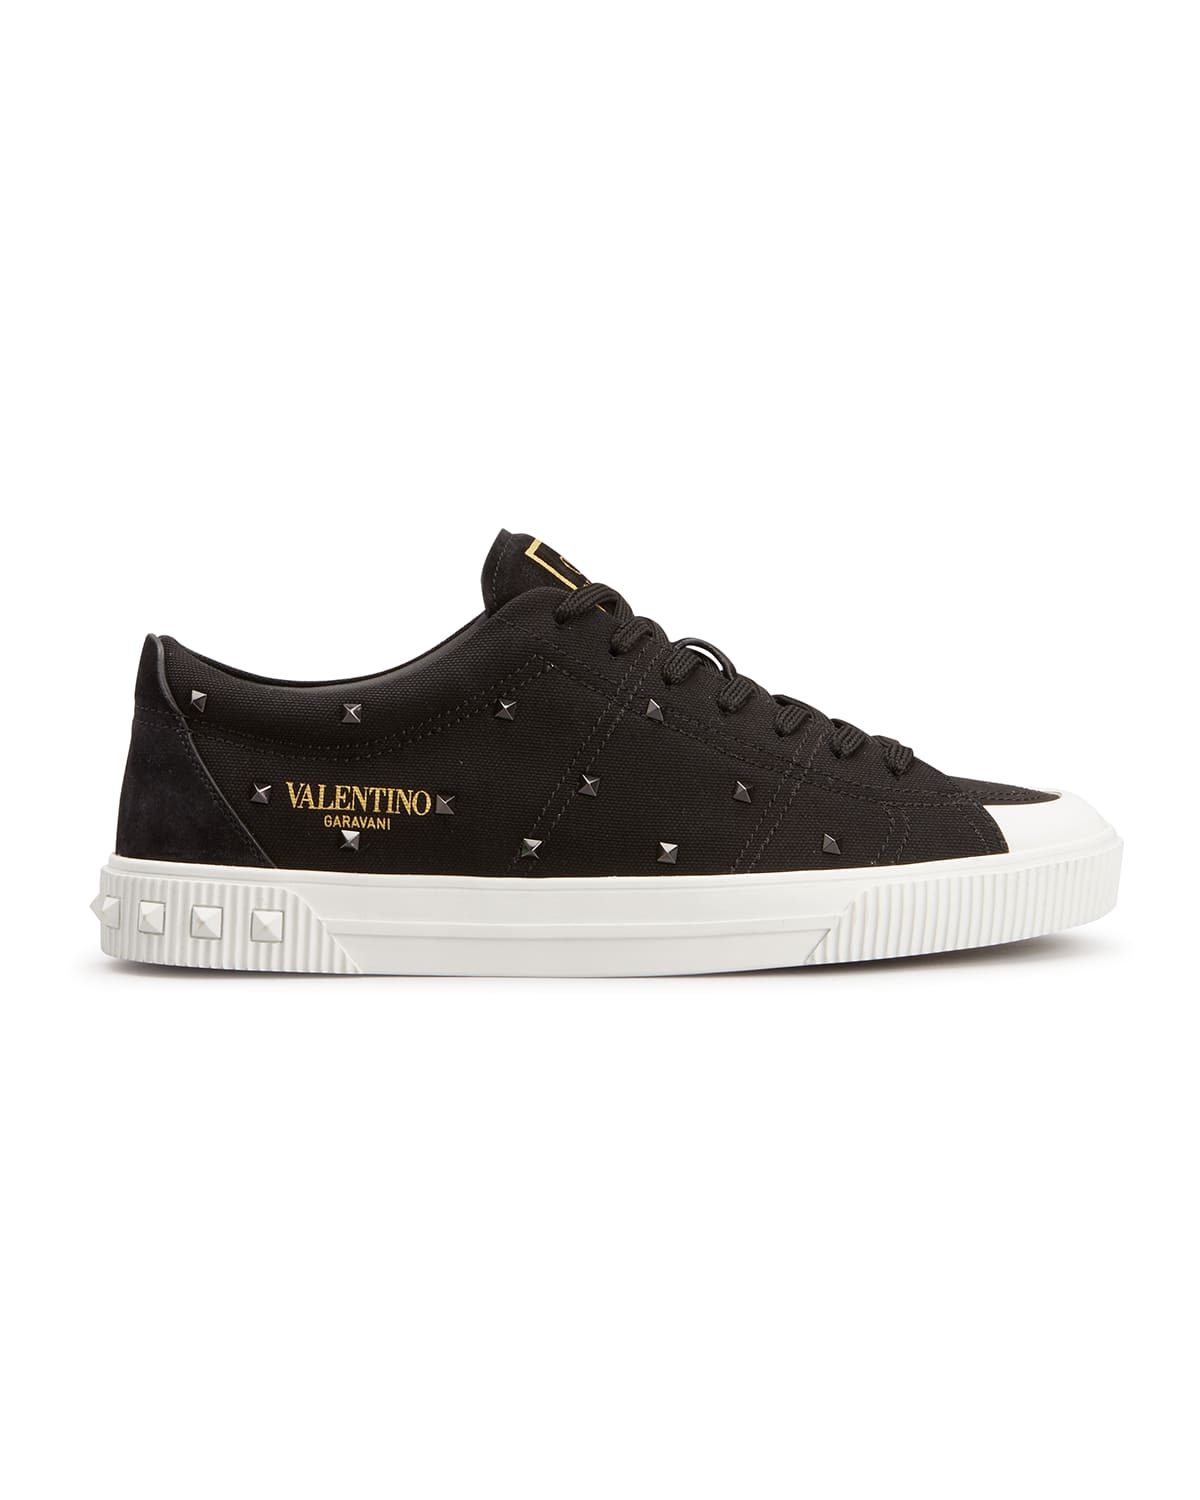 Men's Studded Canvas Low-Top Sneakers